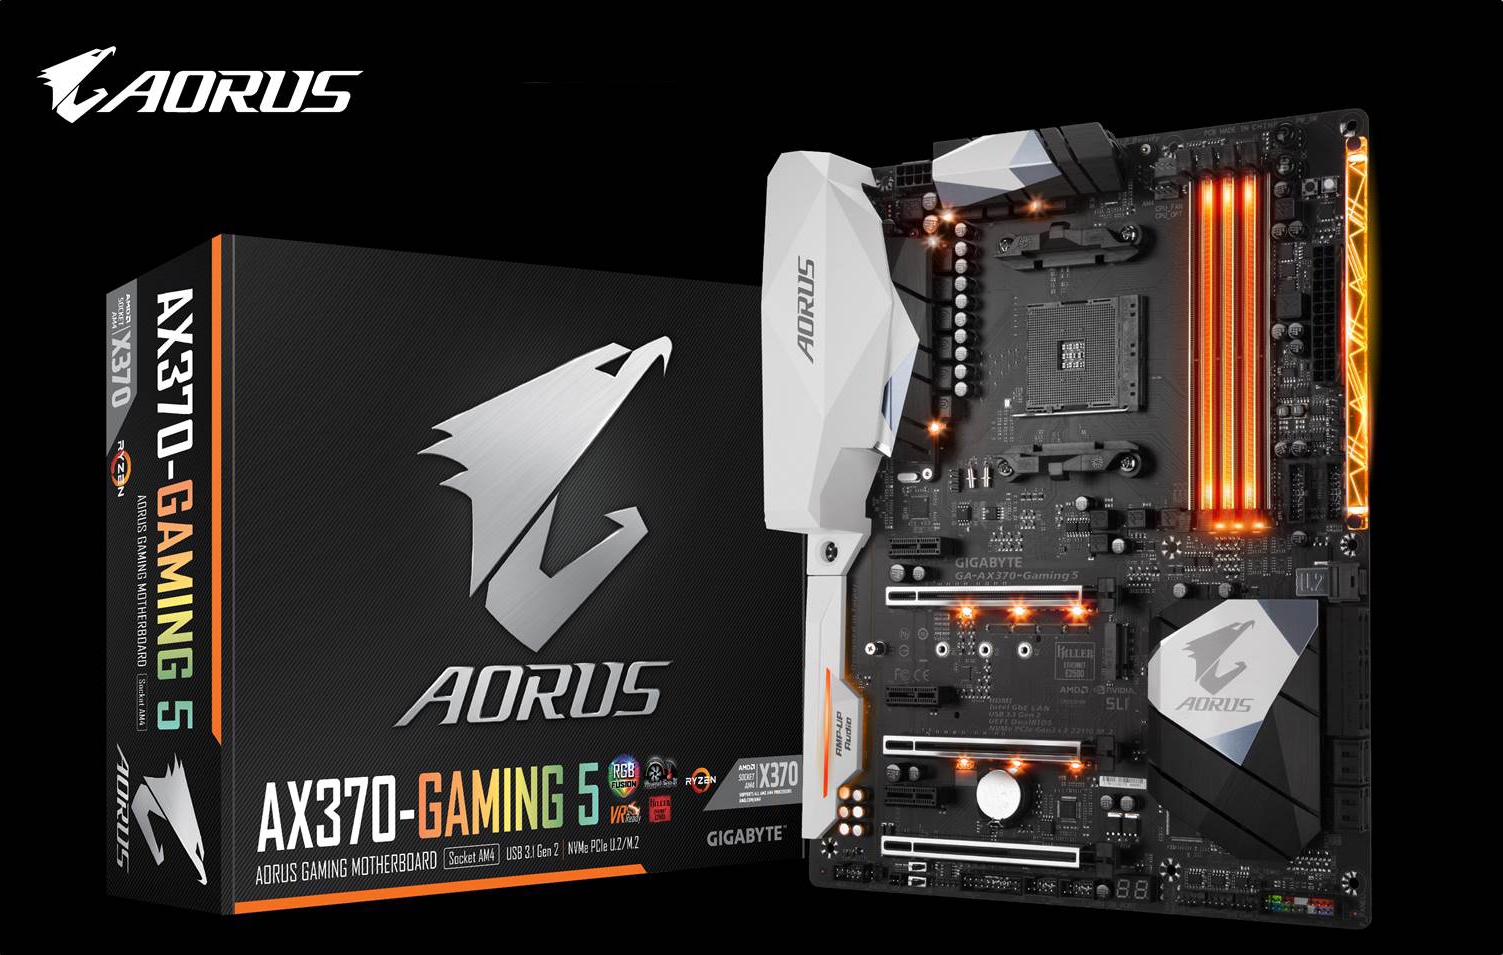 The Ideal Match for Ryzen 7 - AORUS AX370-Gaming 5